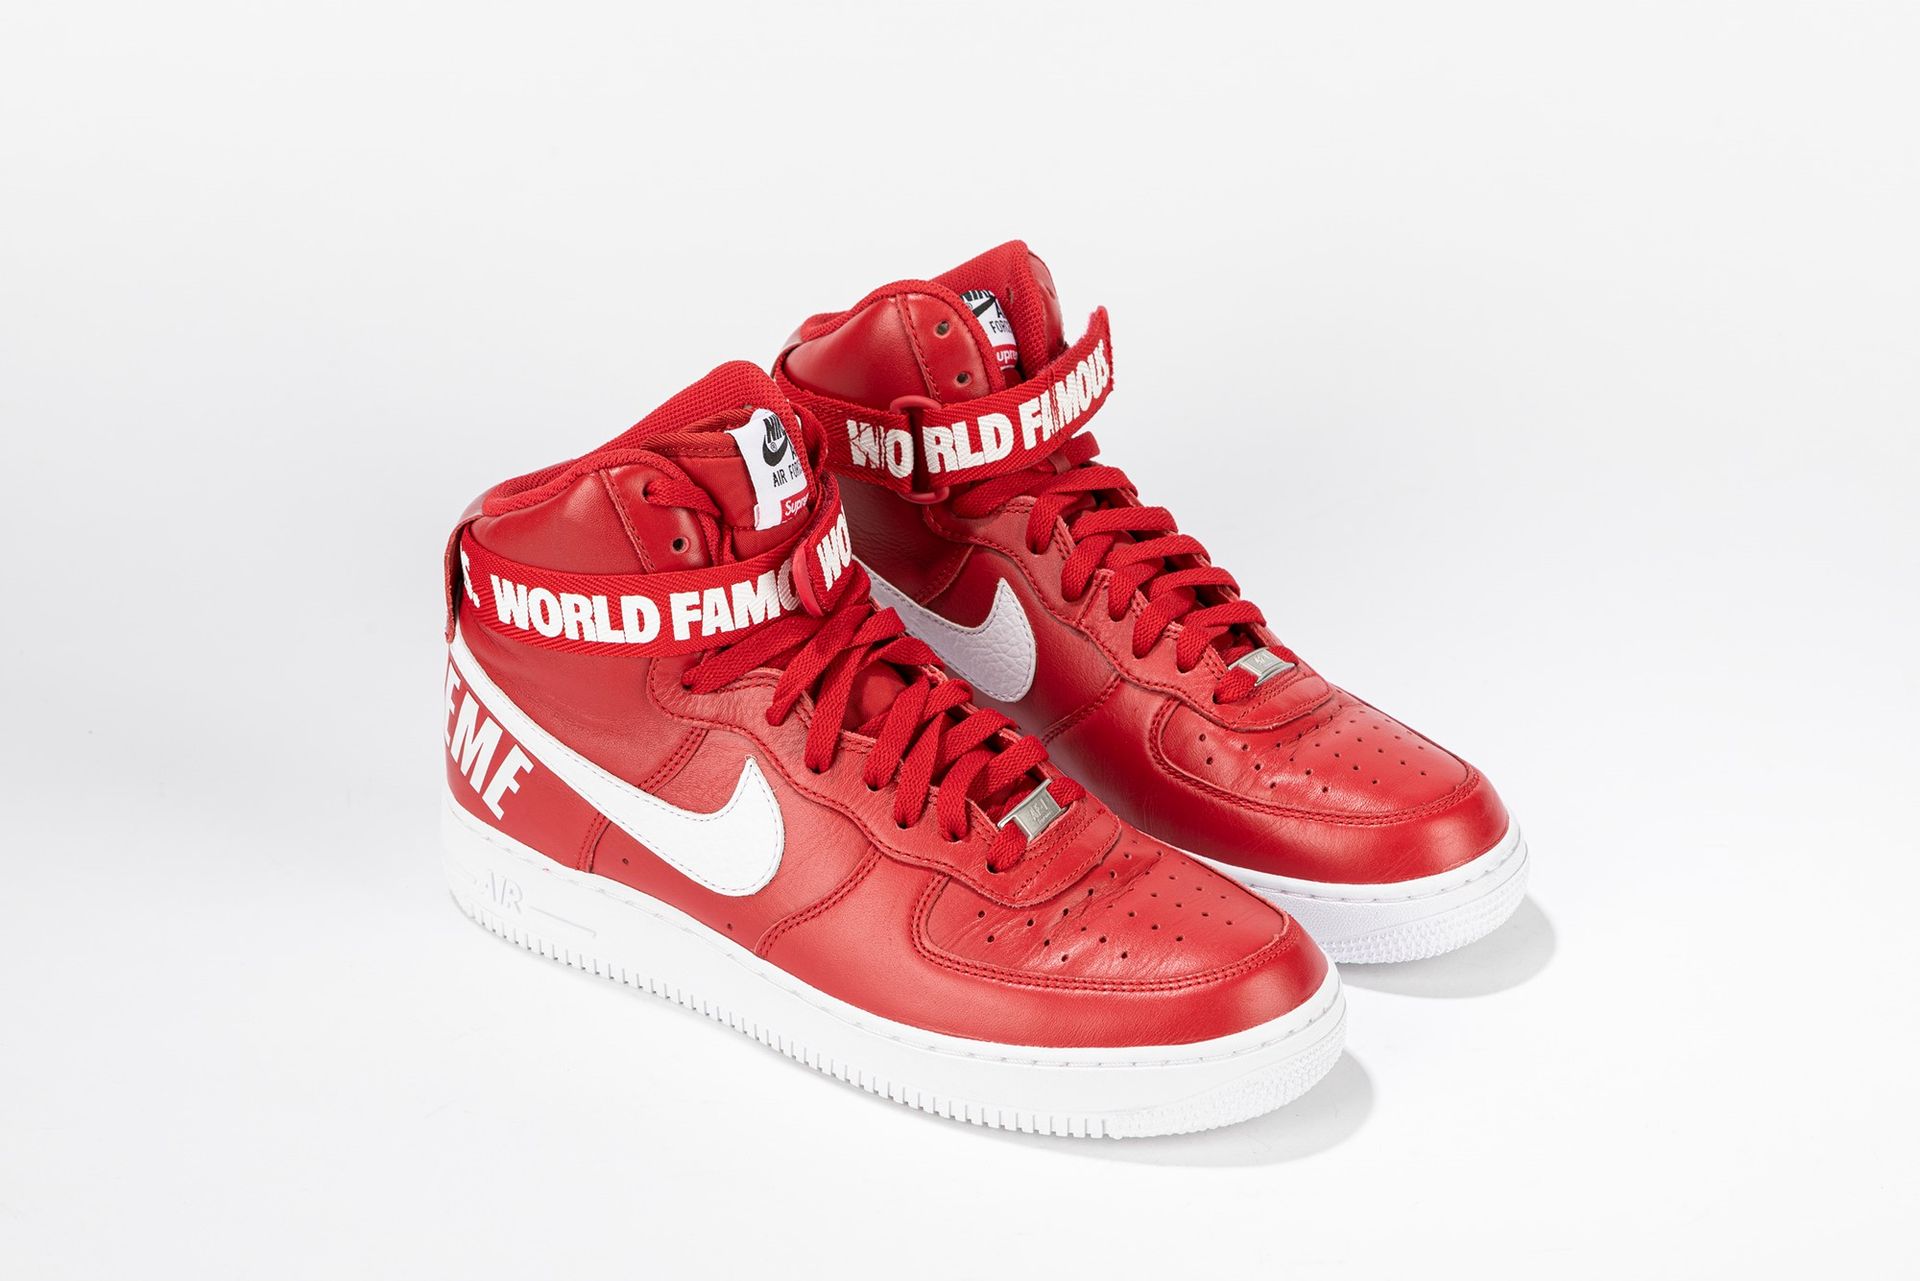 NIKE Air Force 1 High Supreme World Famous Red | Size US 9.5 EUR 43, 2014


Nike&hellip;